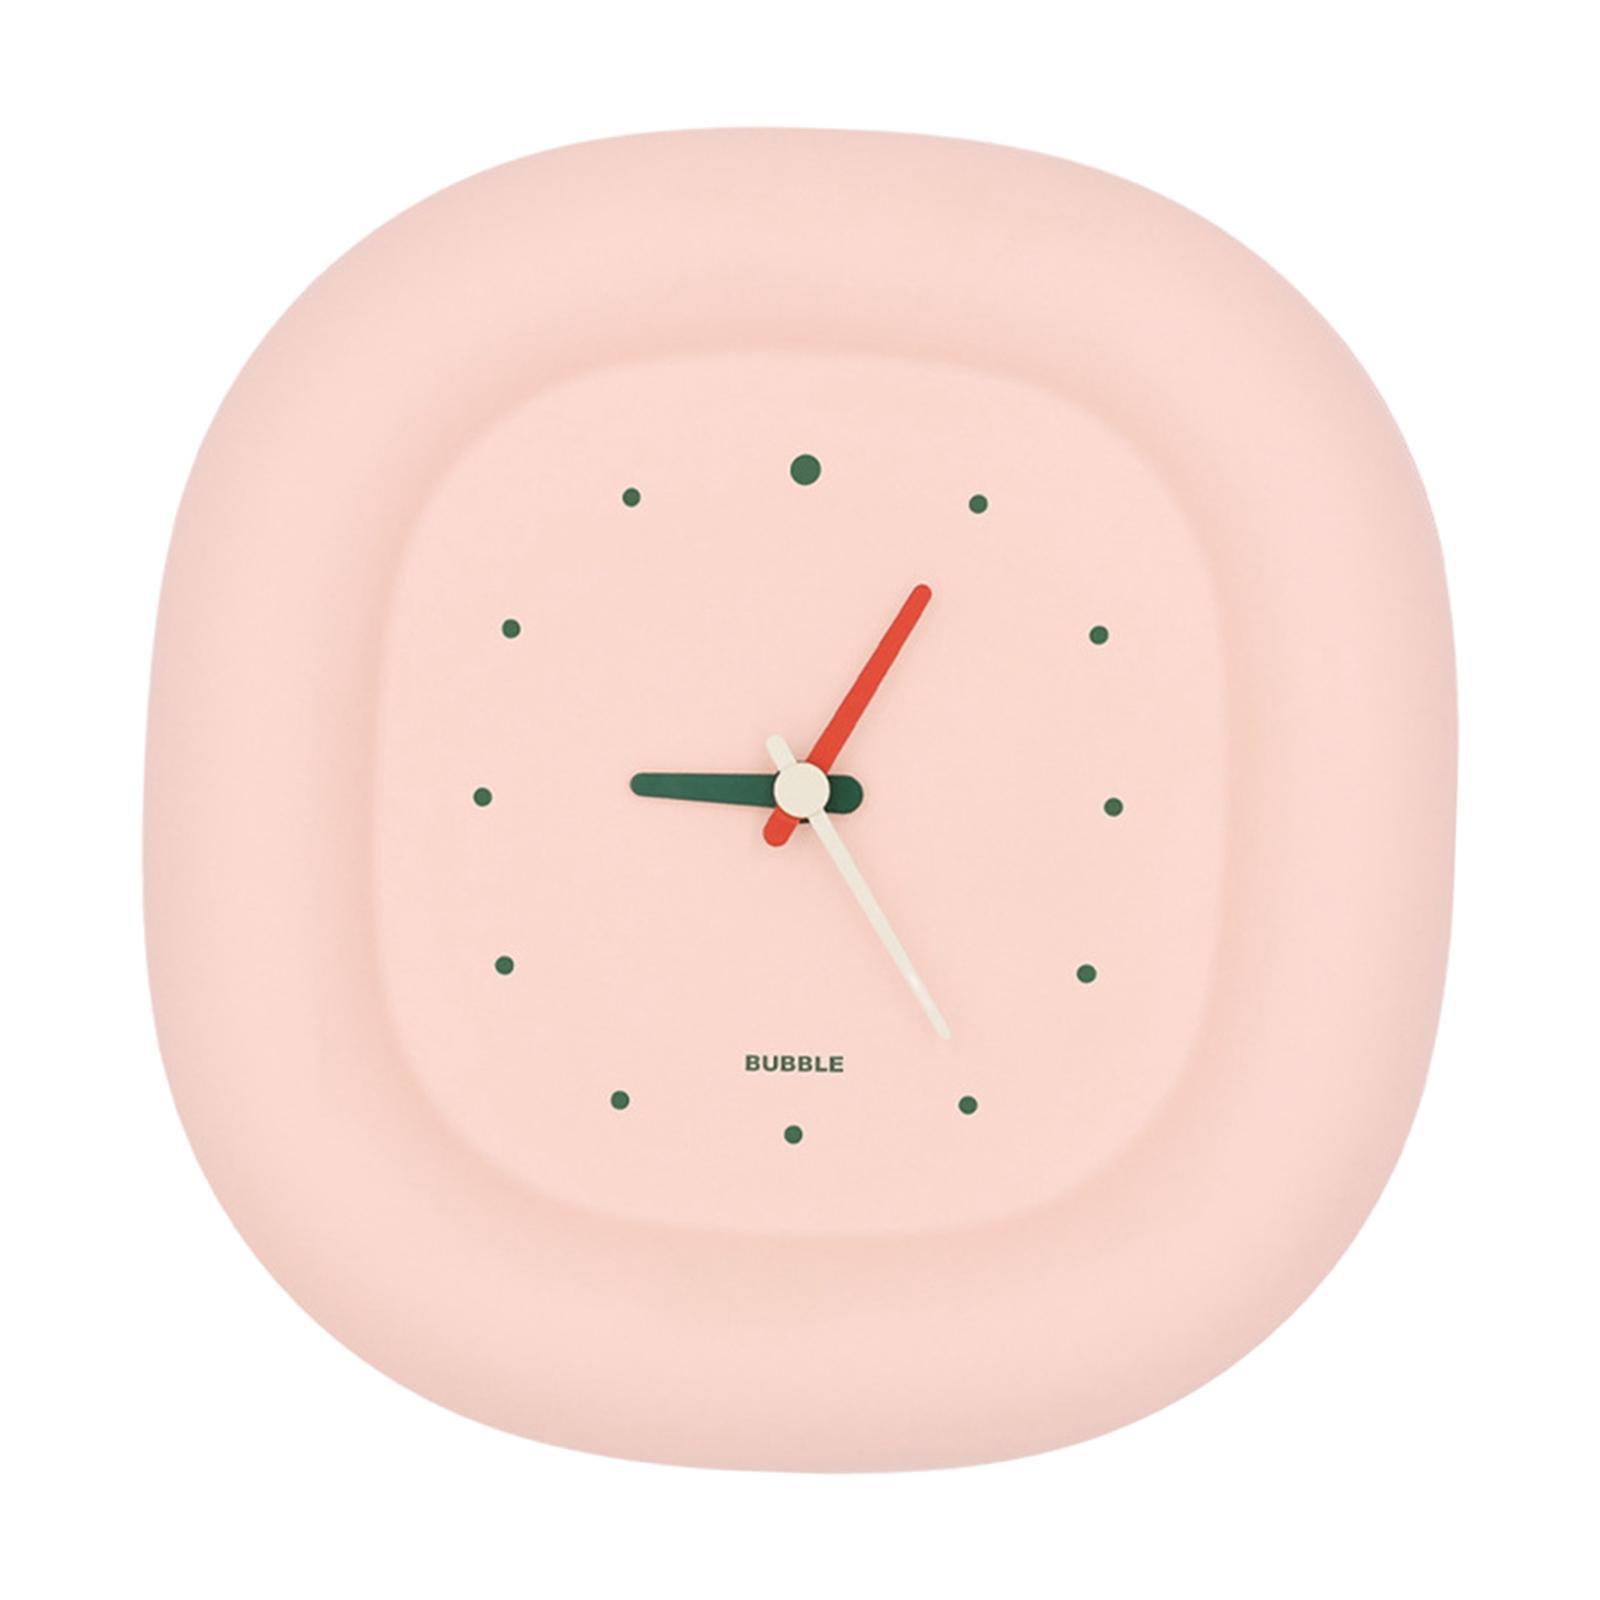 Bubble Clock Wall Clock Free Standing Clocks Silent for Living Room